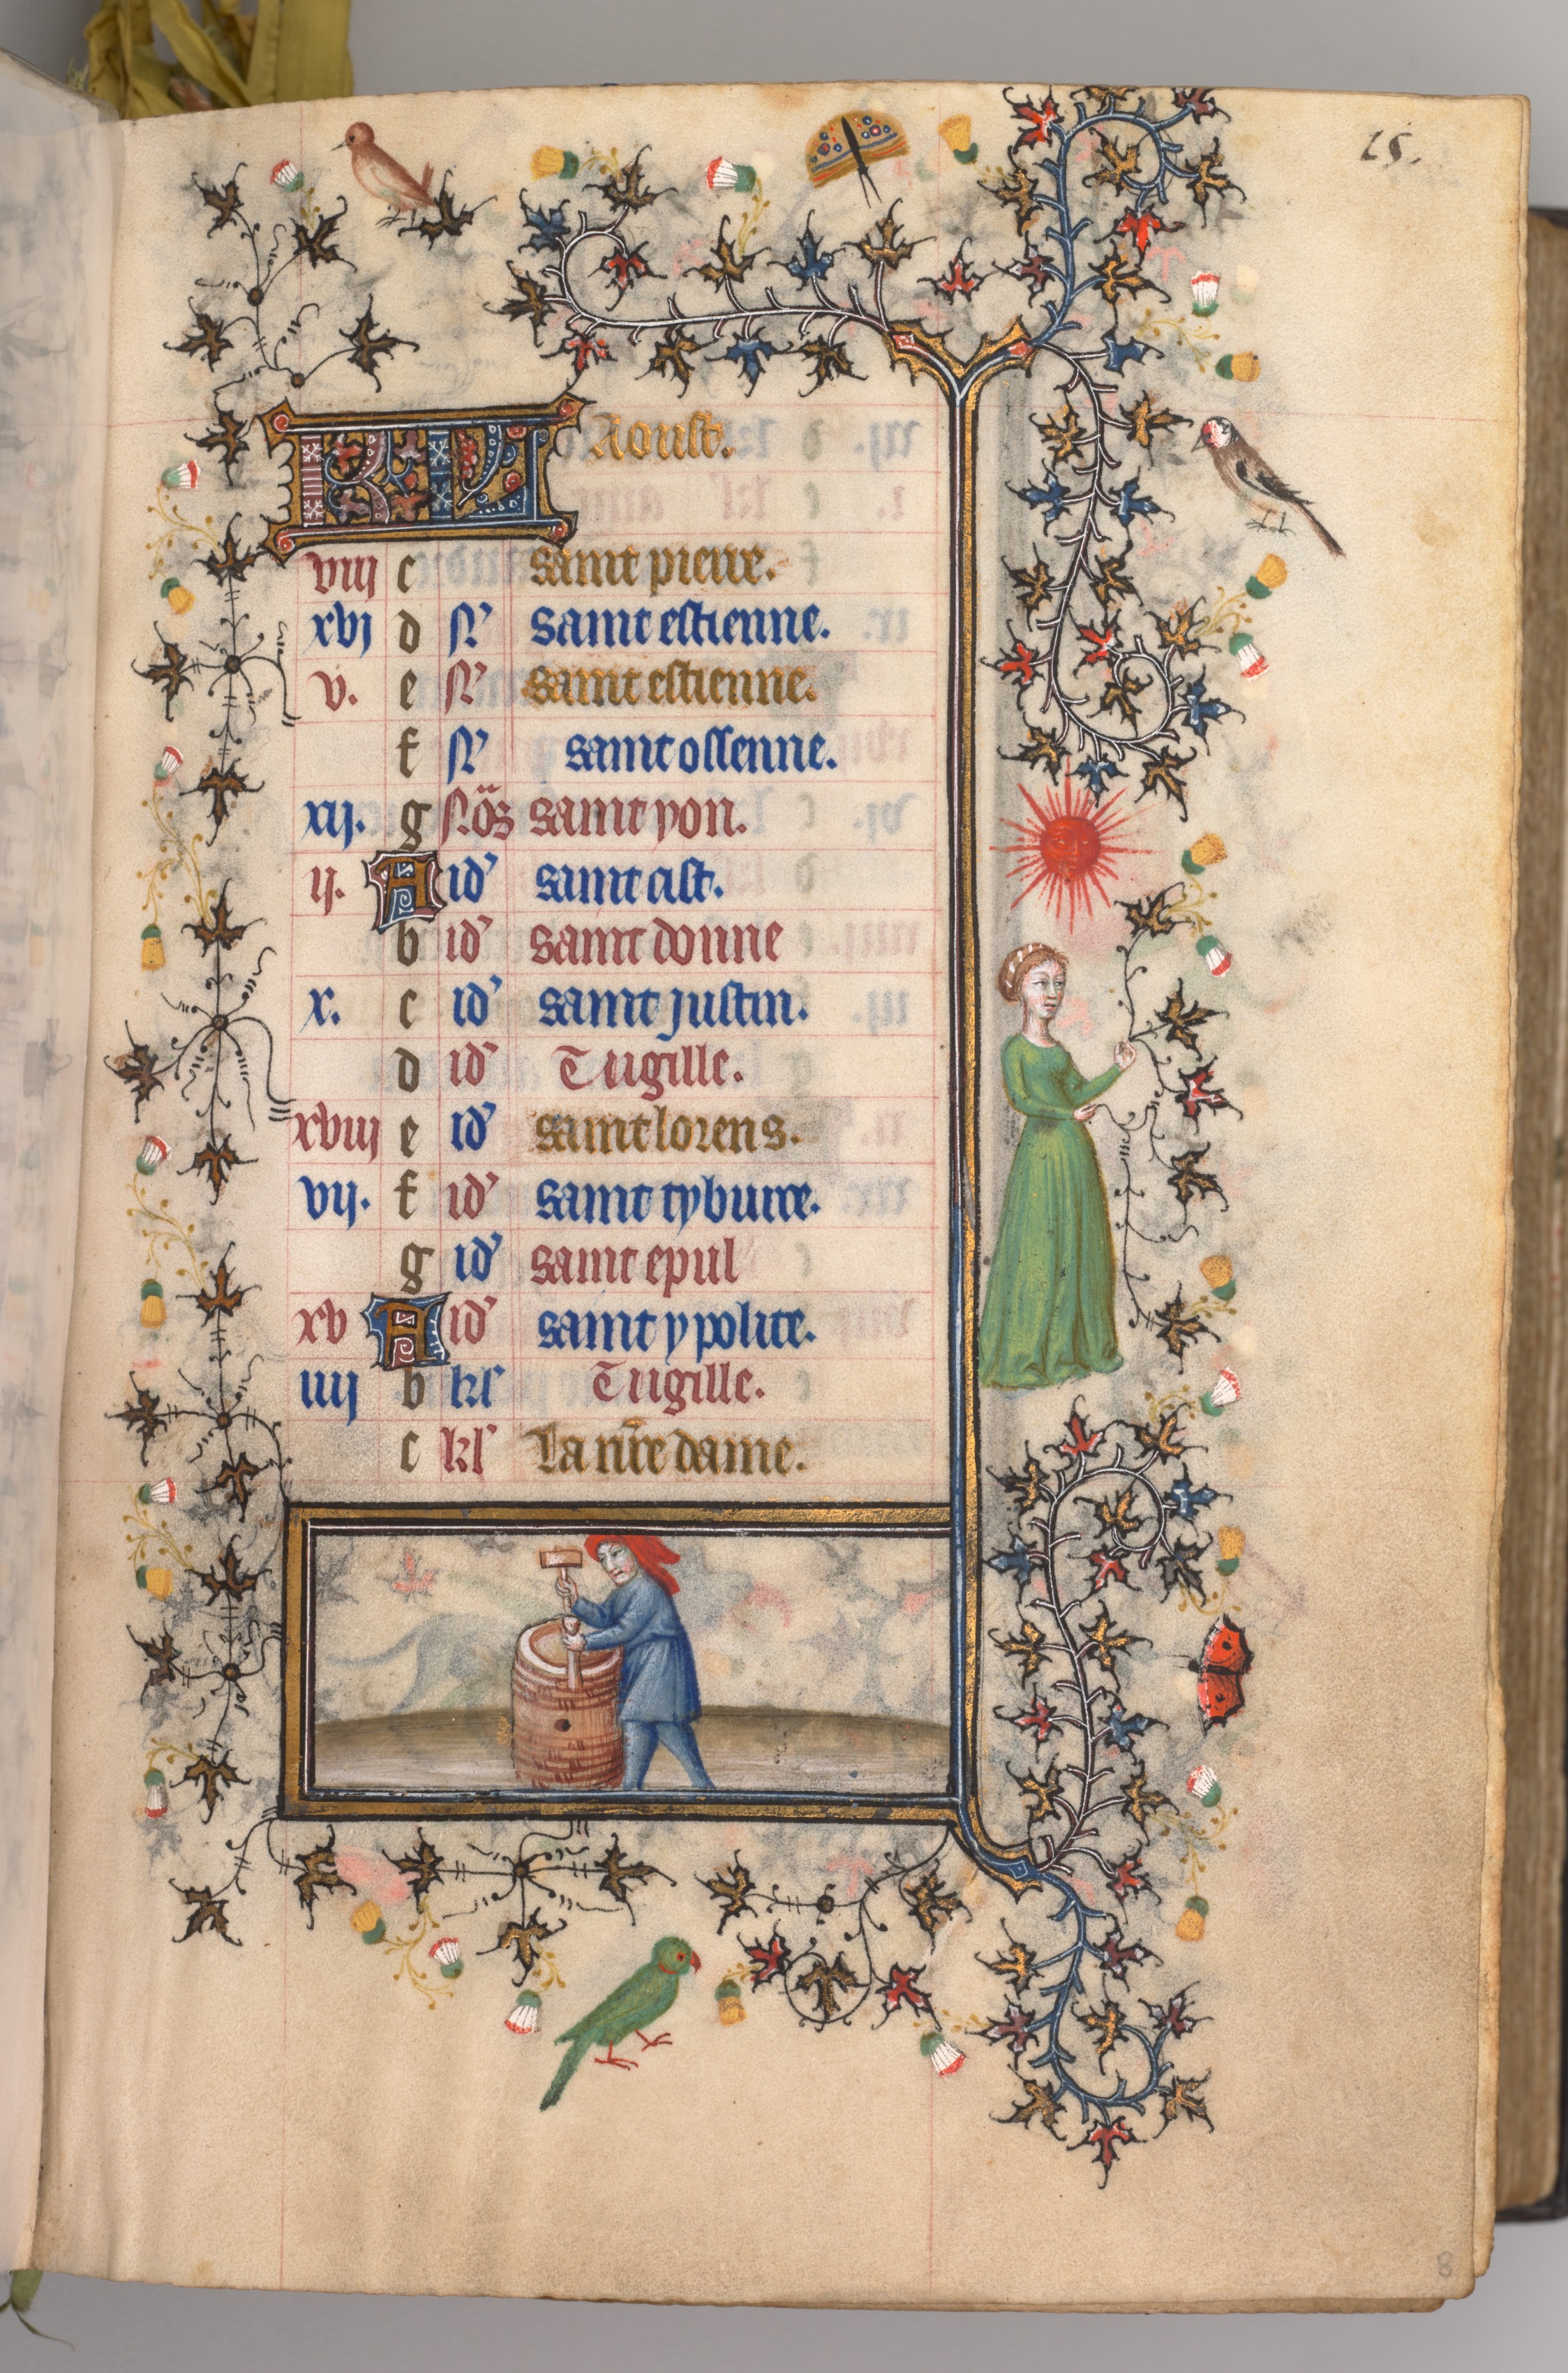 Hours of Charles the Noble, King of Navarre (1361-1425): fol. 8r, August